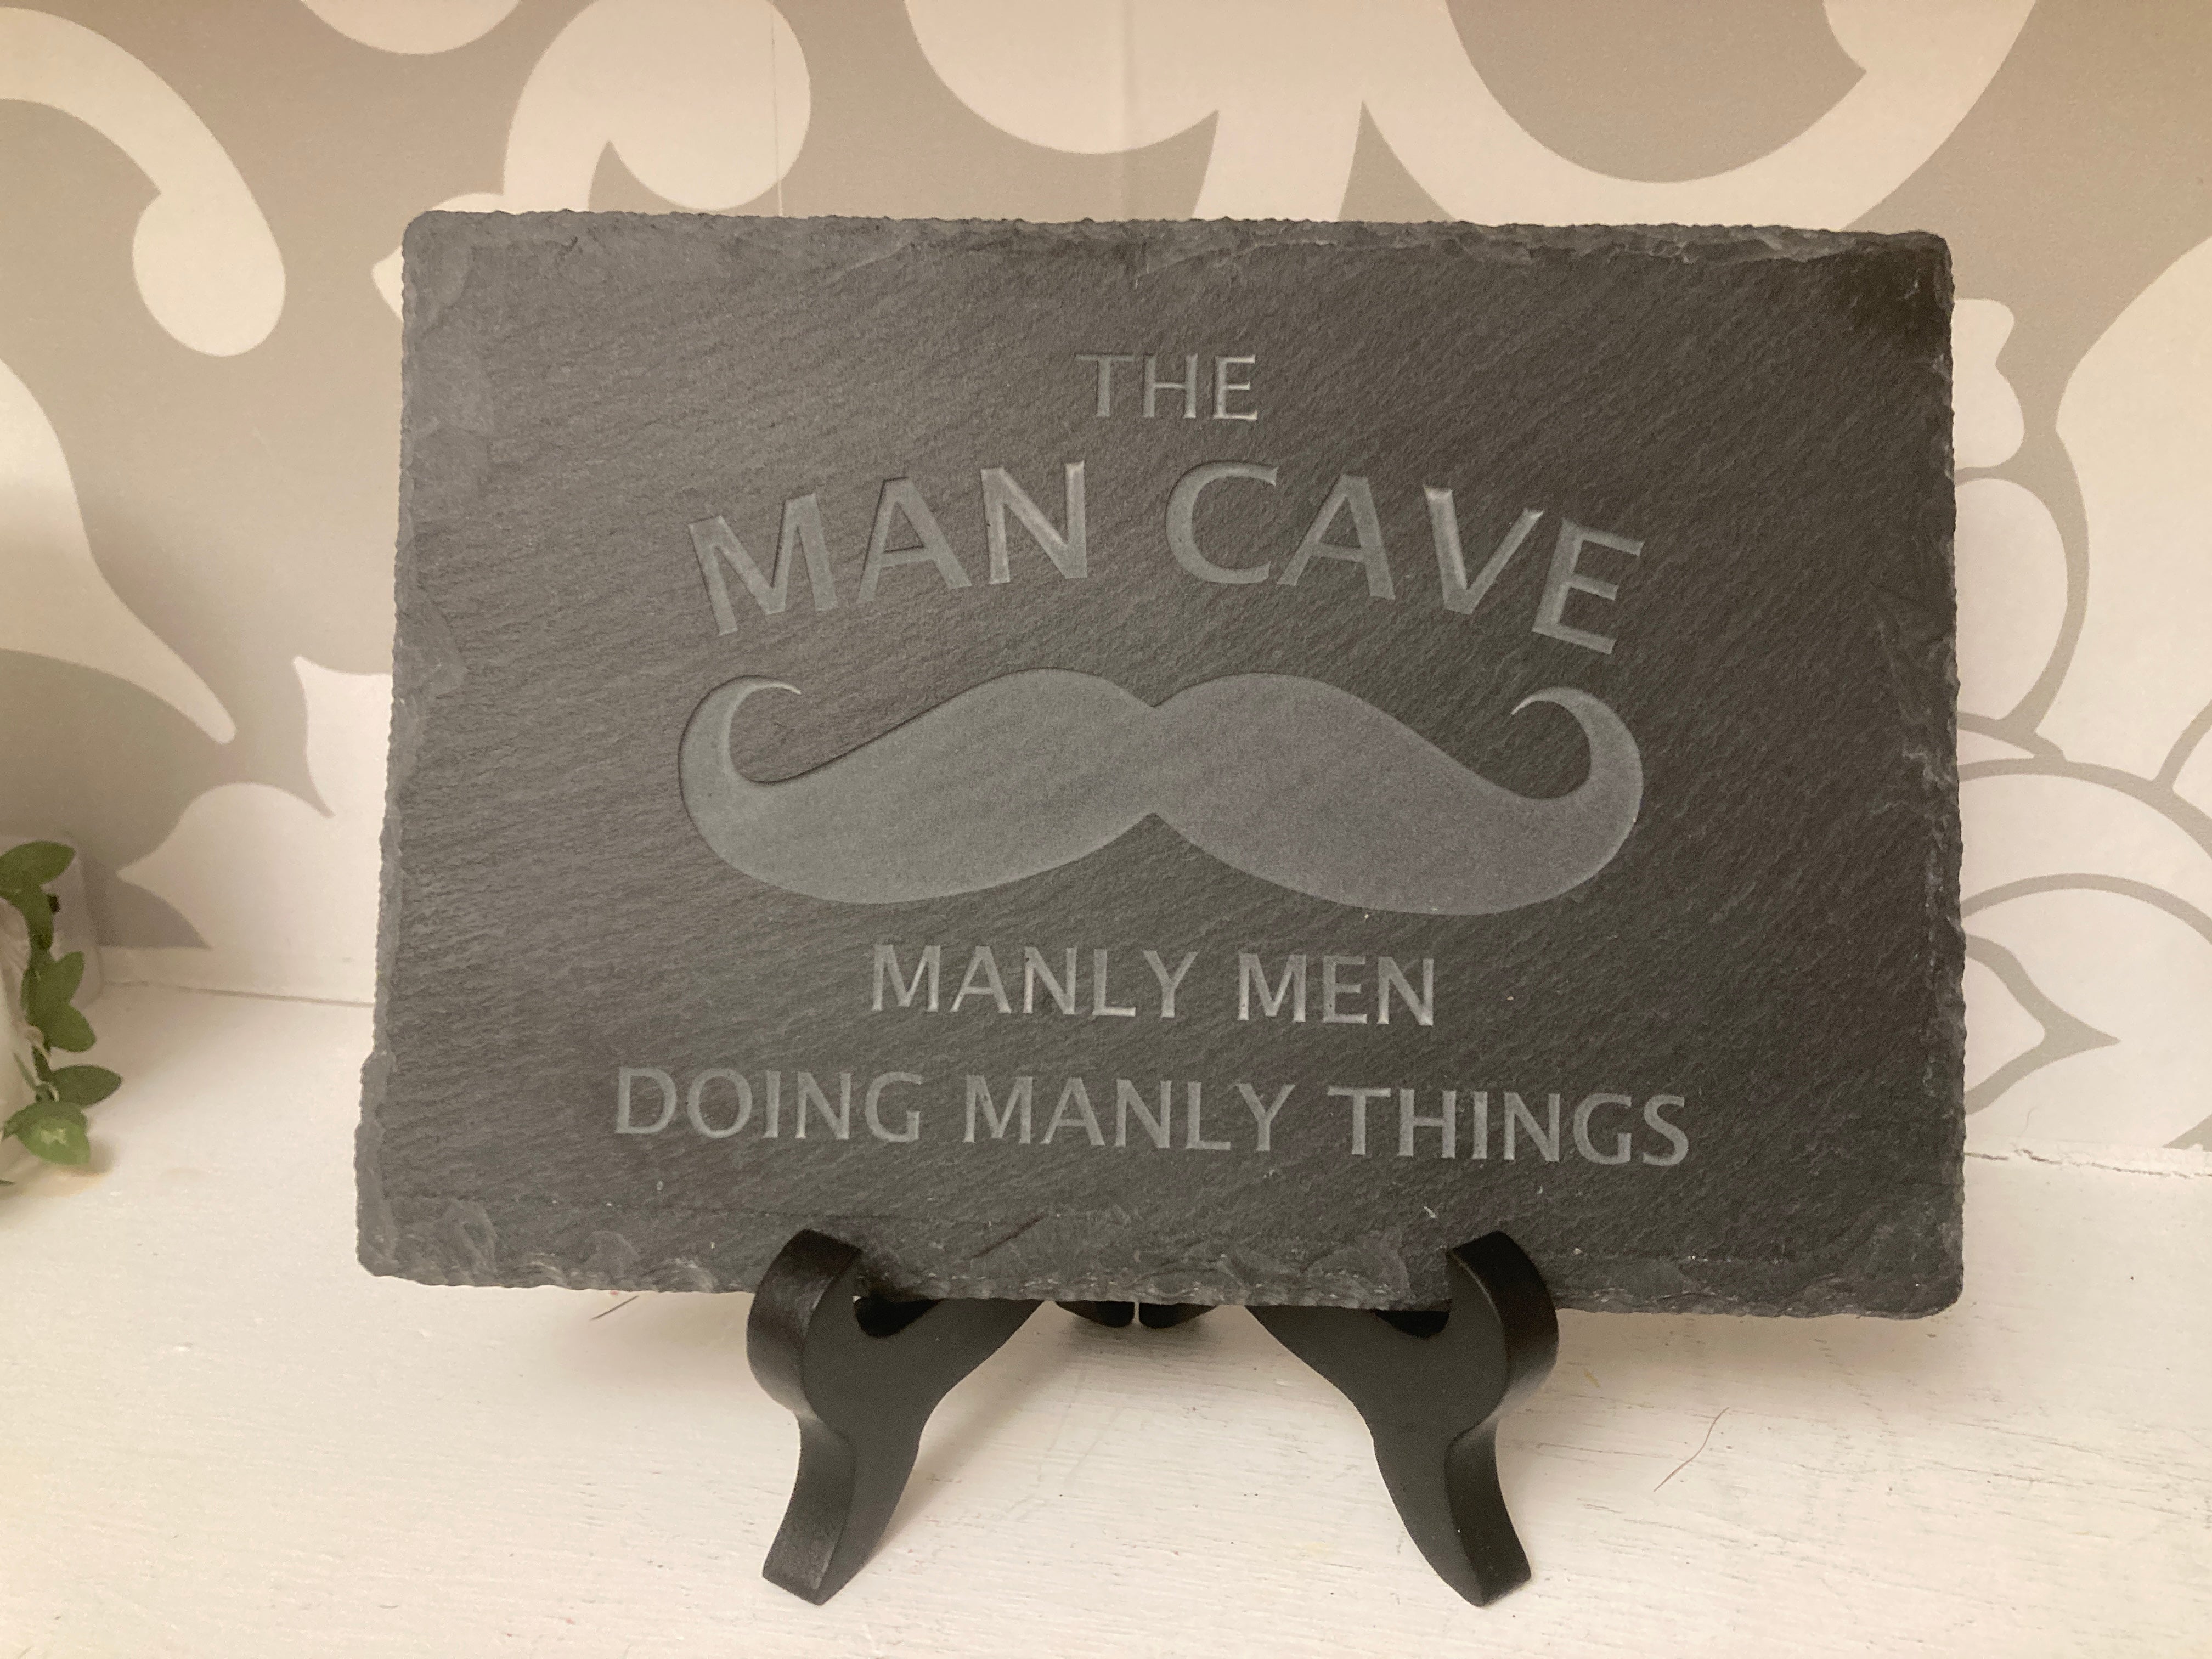 The Man Cave. Manly Men Doing Manly Things Desk Sign/Shelf Sign. 5"x7" carved slate sign.